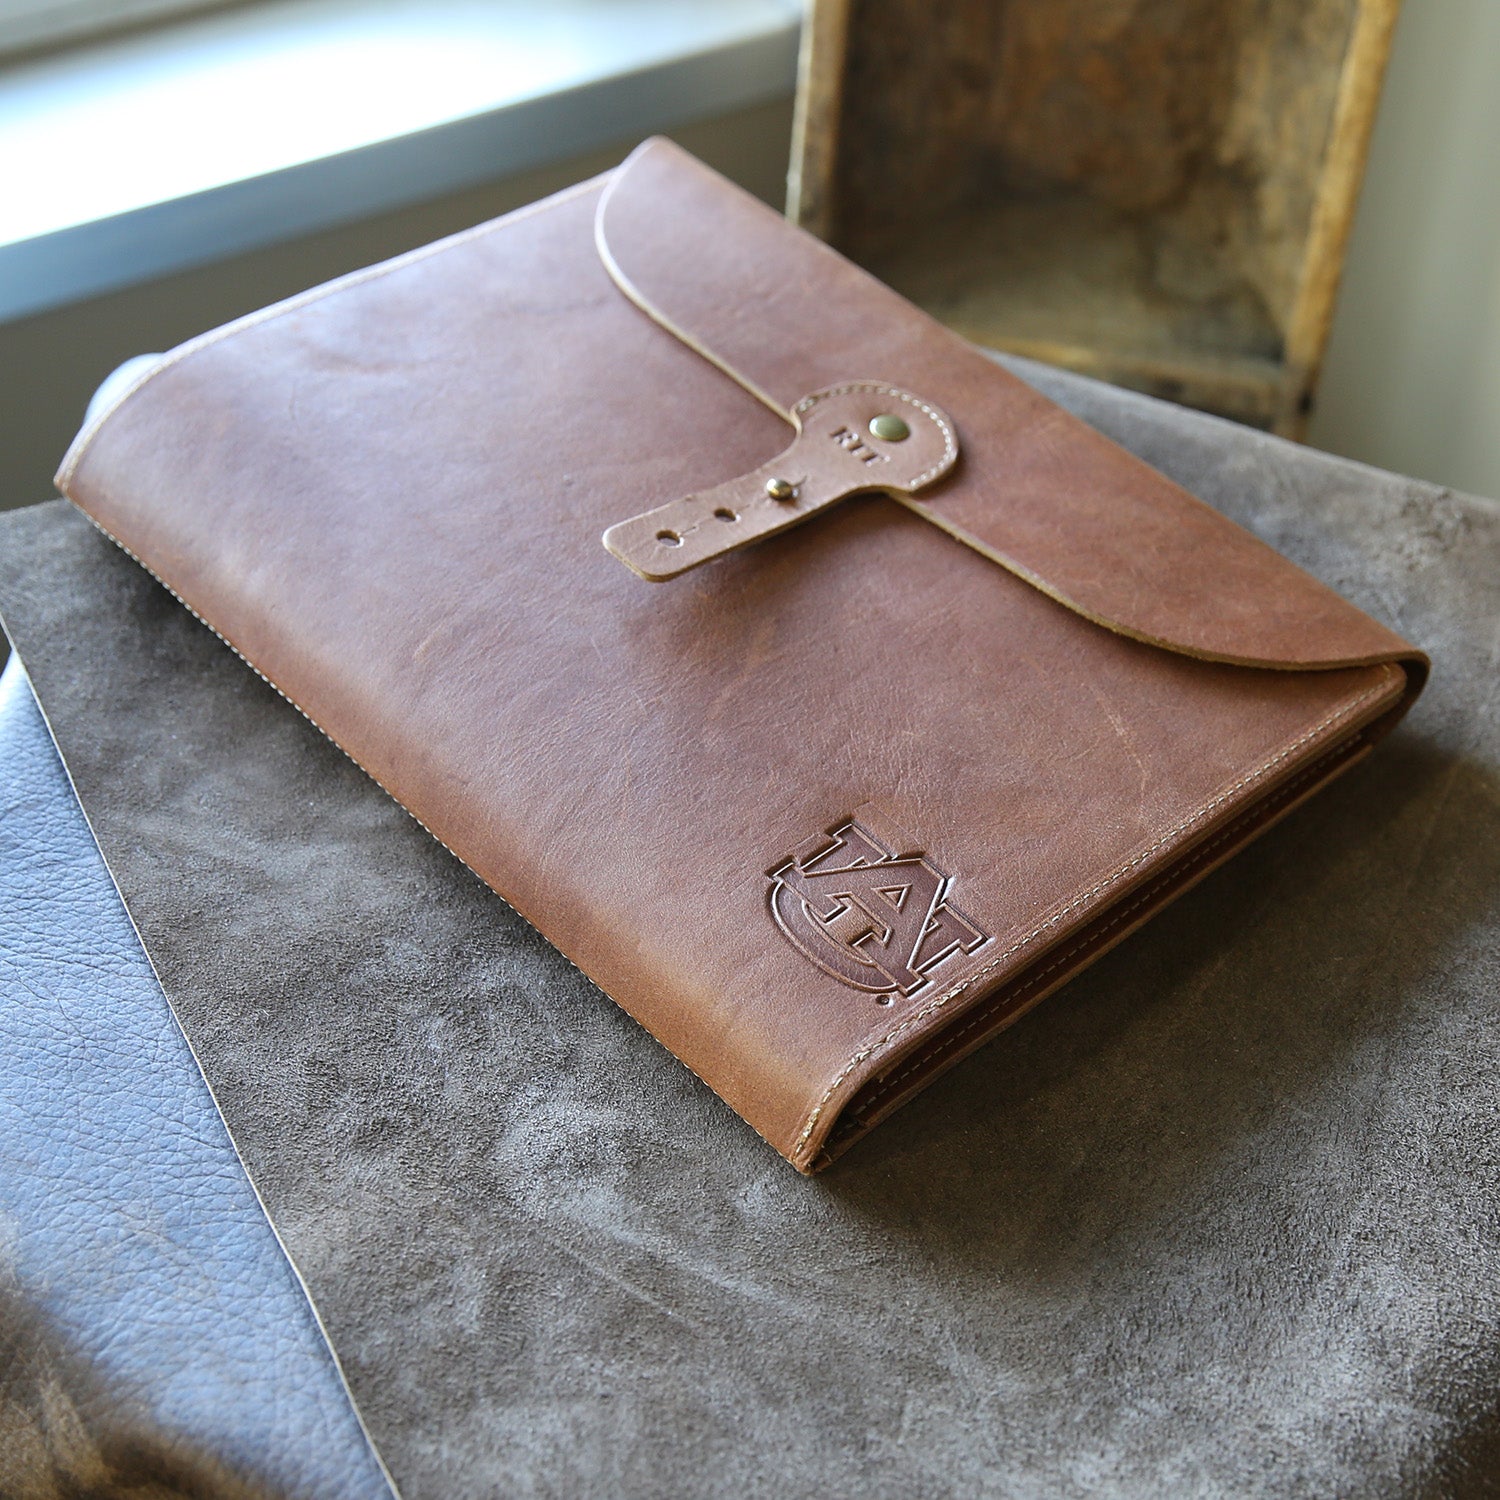 Fine leather A4 moleskin journal cover with Auburn University logo and personalized initials